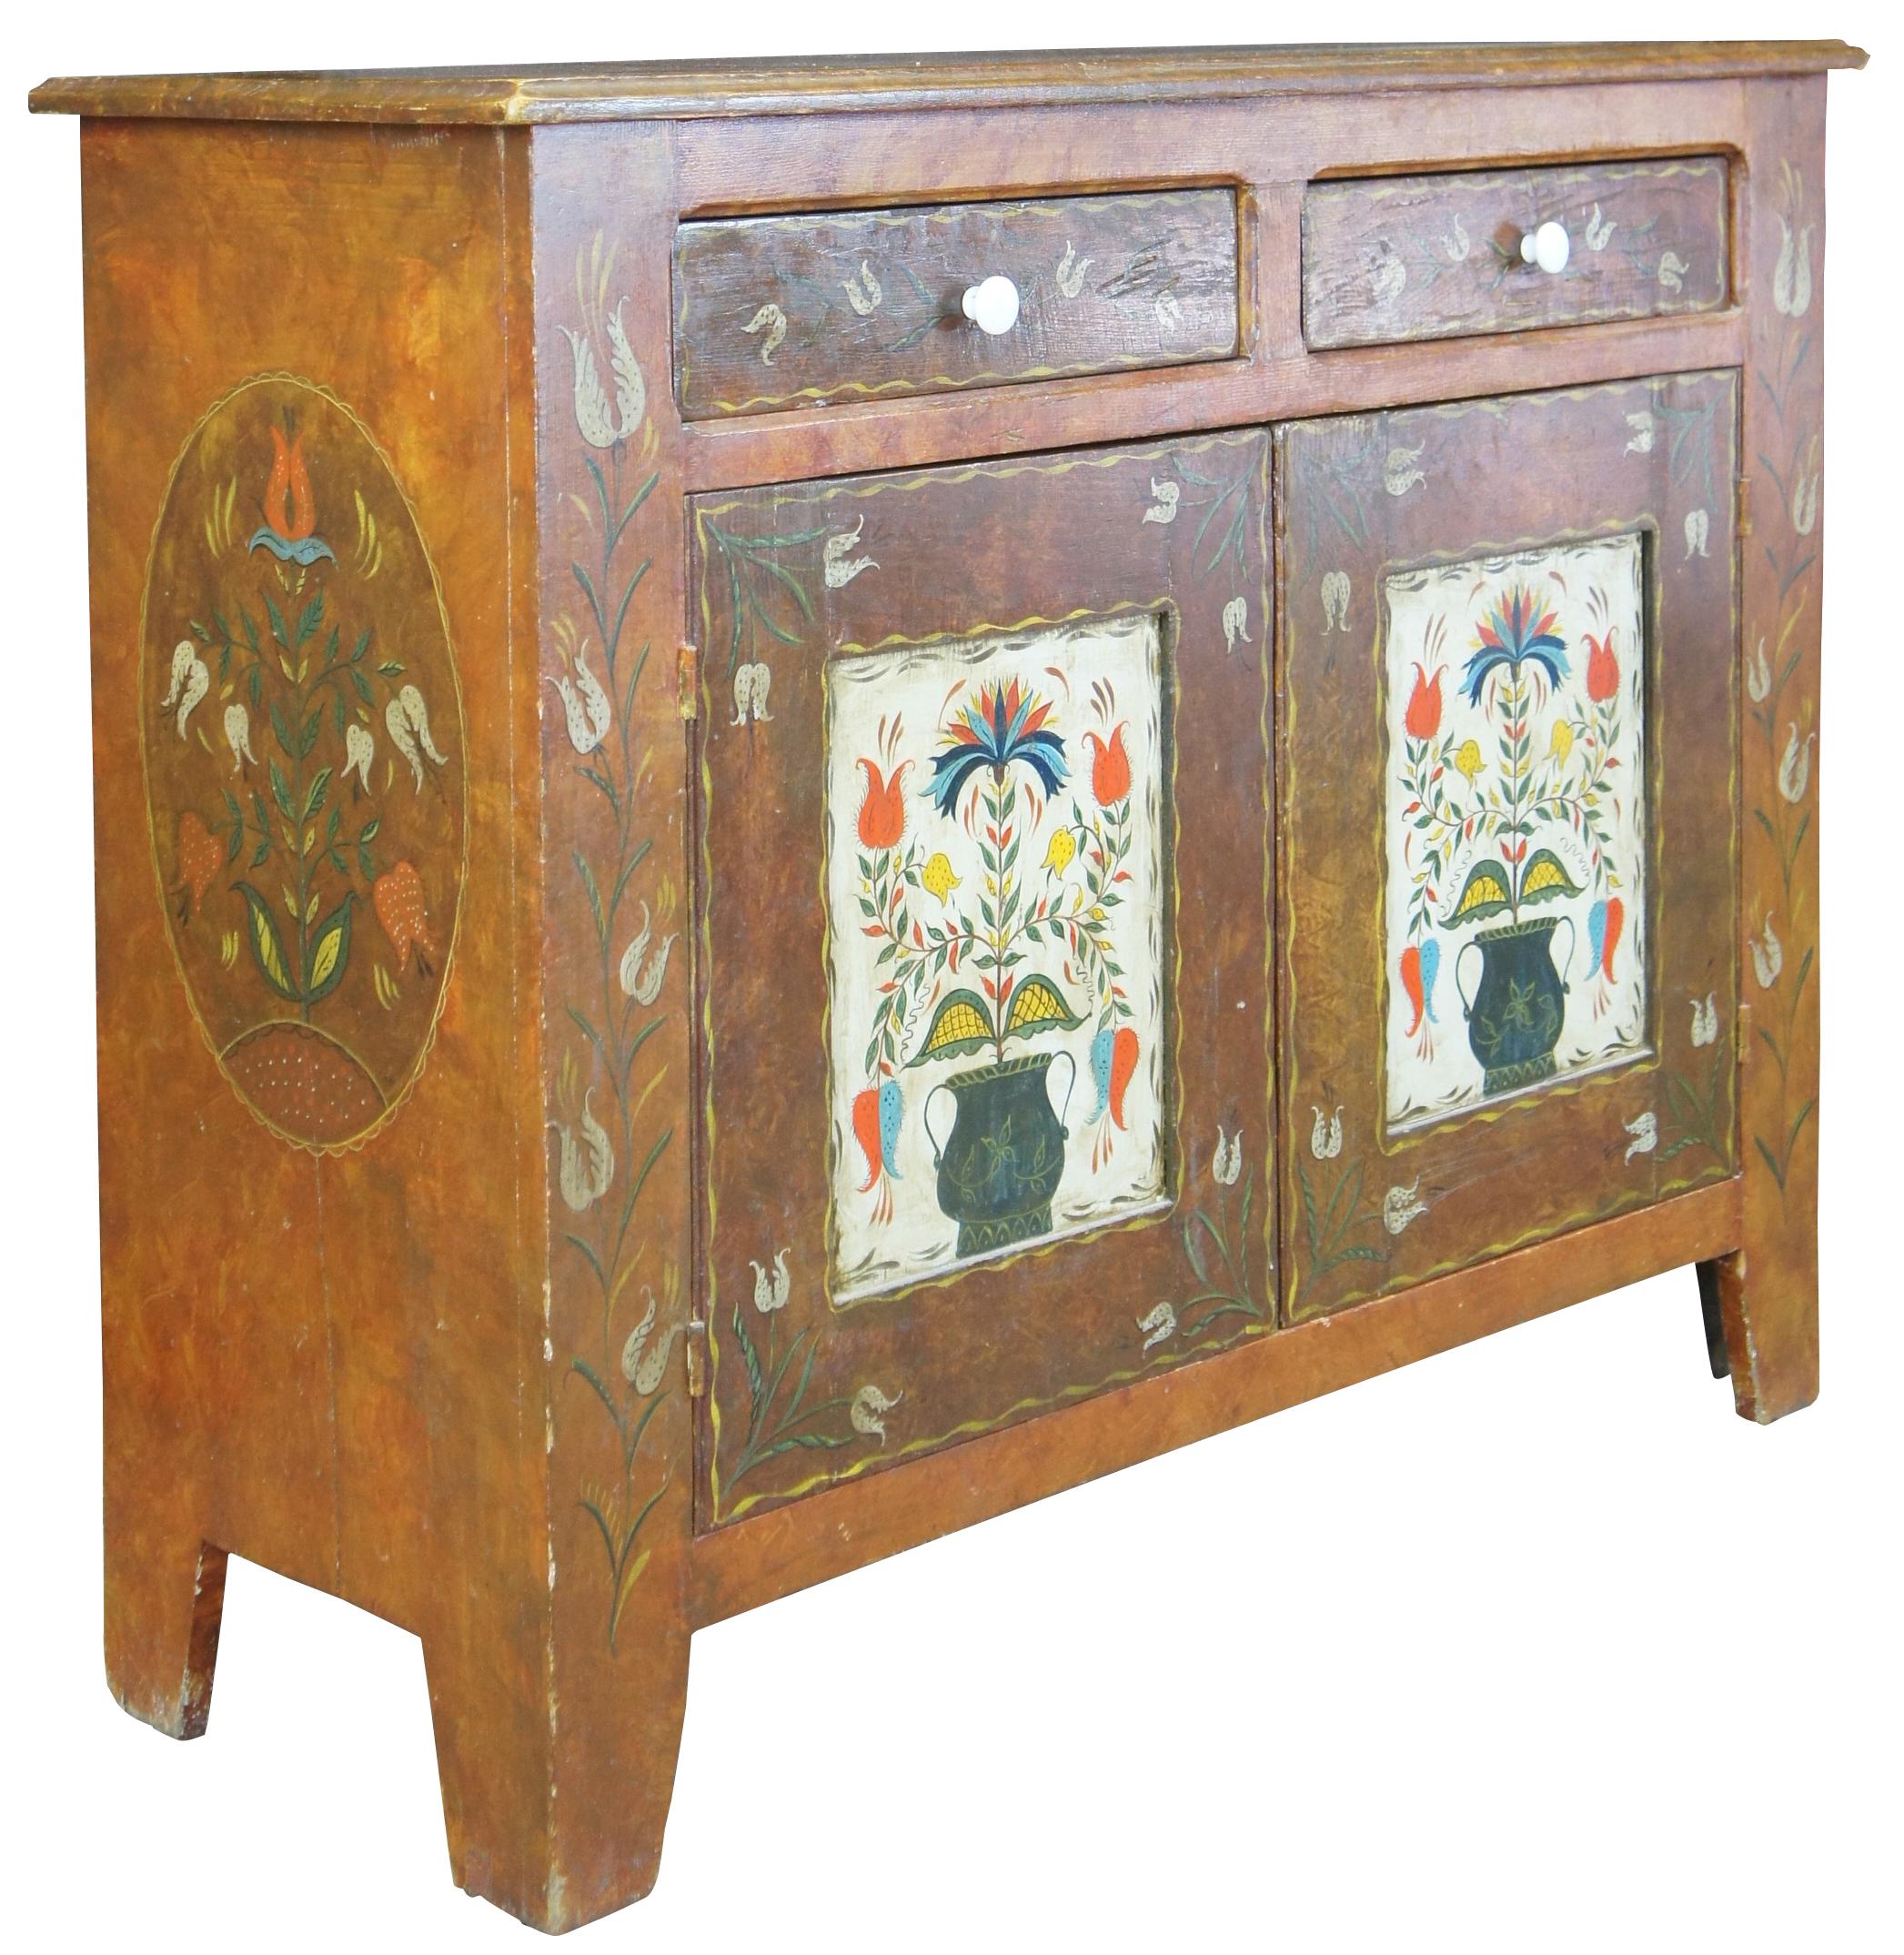 Late 19th Century Pennsylvannia Dutch Folk Art Cabinet. A rectangular form made from pine with a hand painted floral design over a burled base. Features 2 drawers over lower cabinet with one shelf and blue painted interior. Includes oval painted